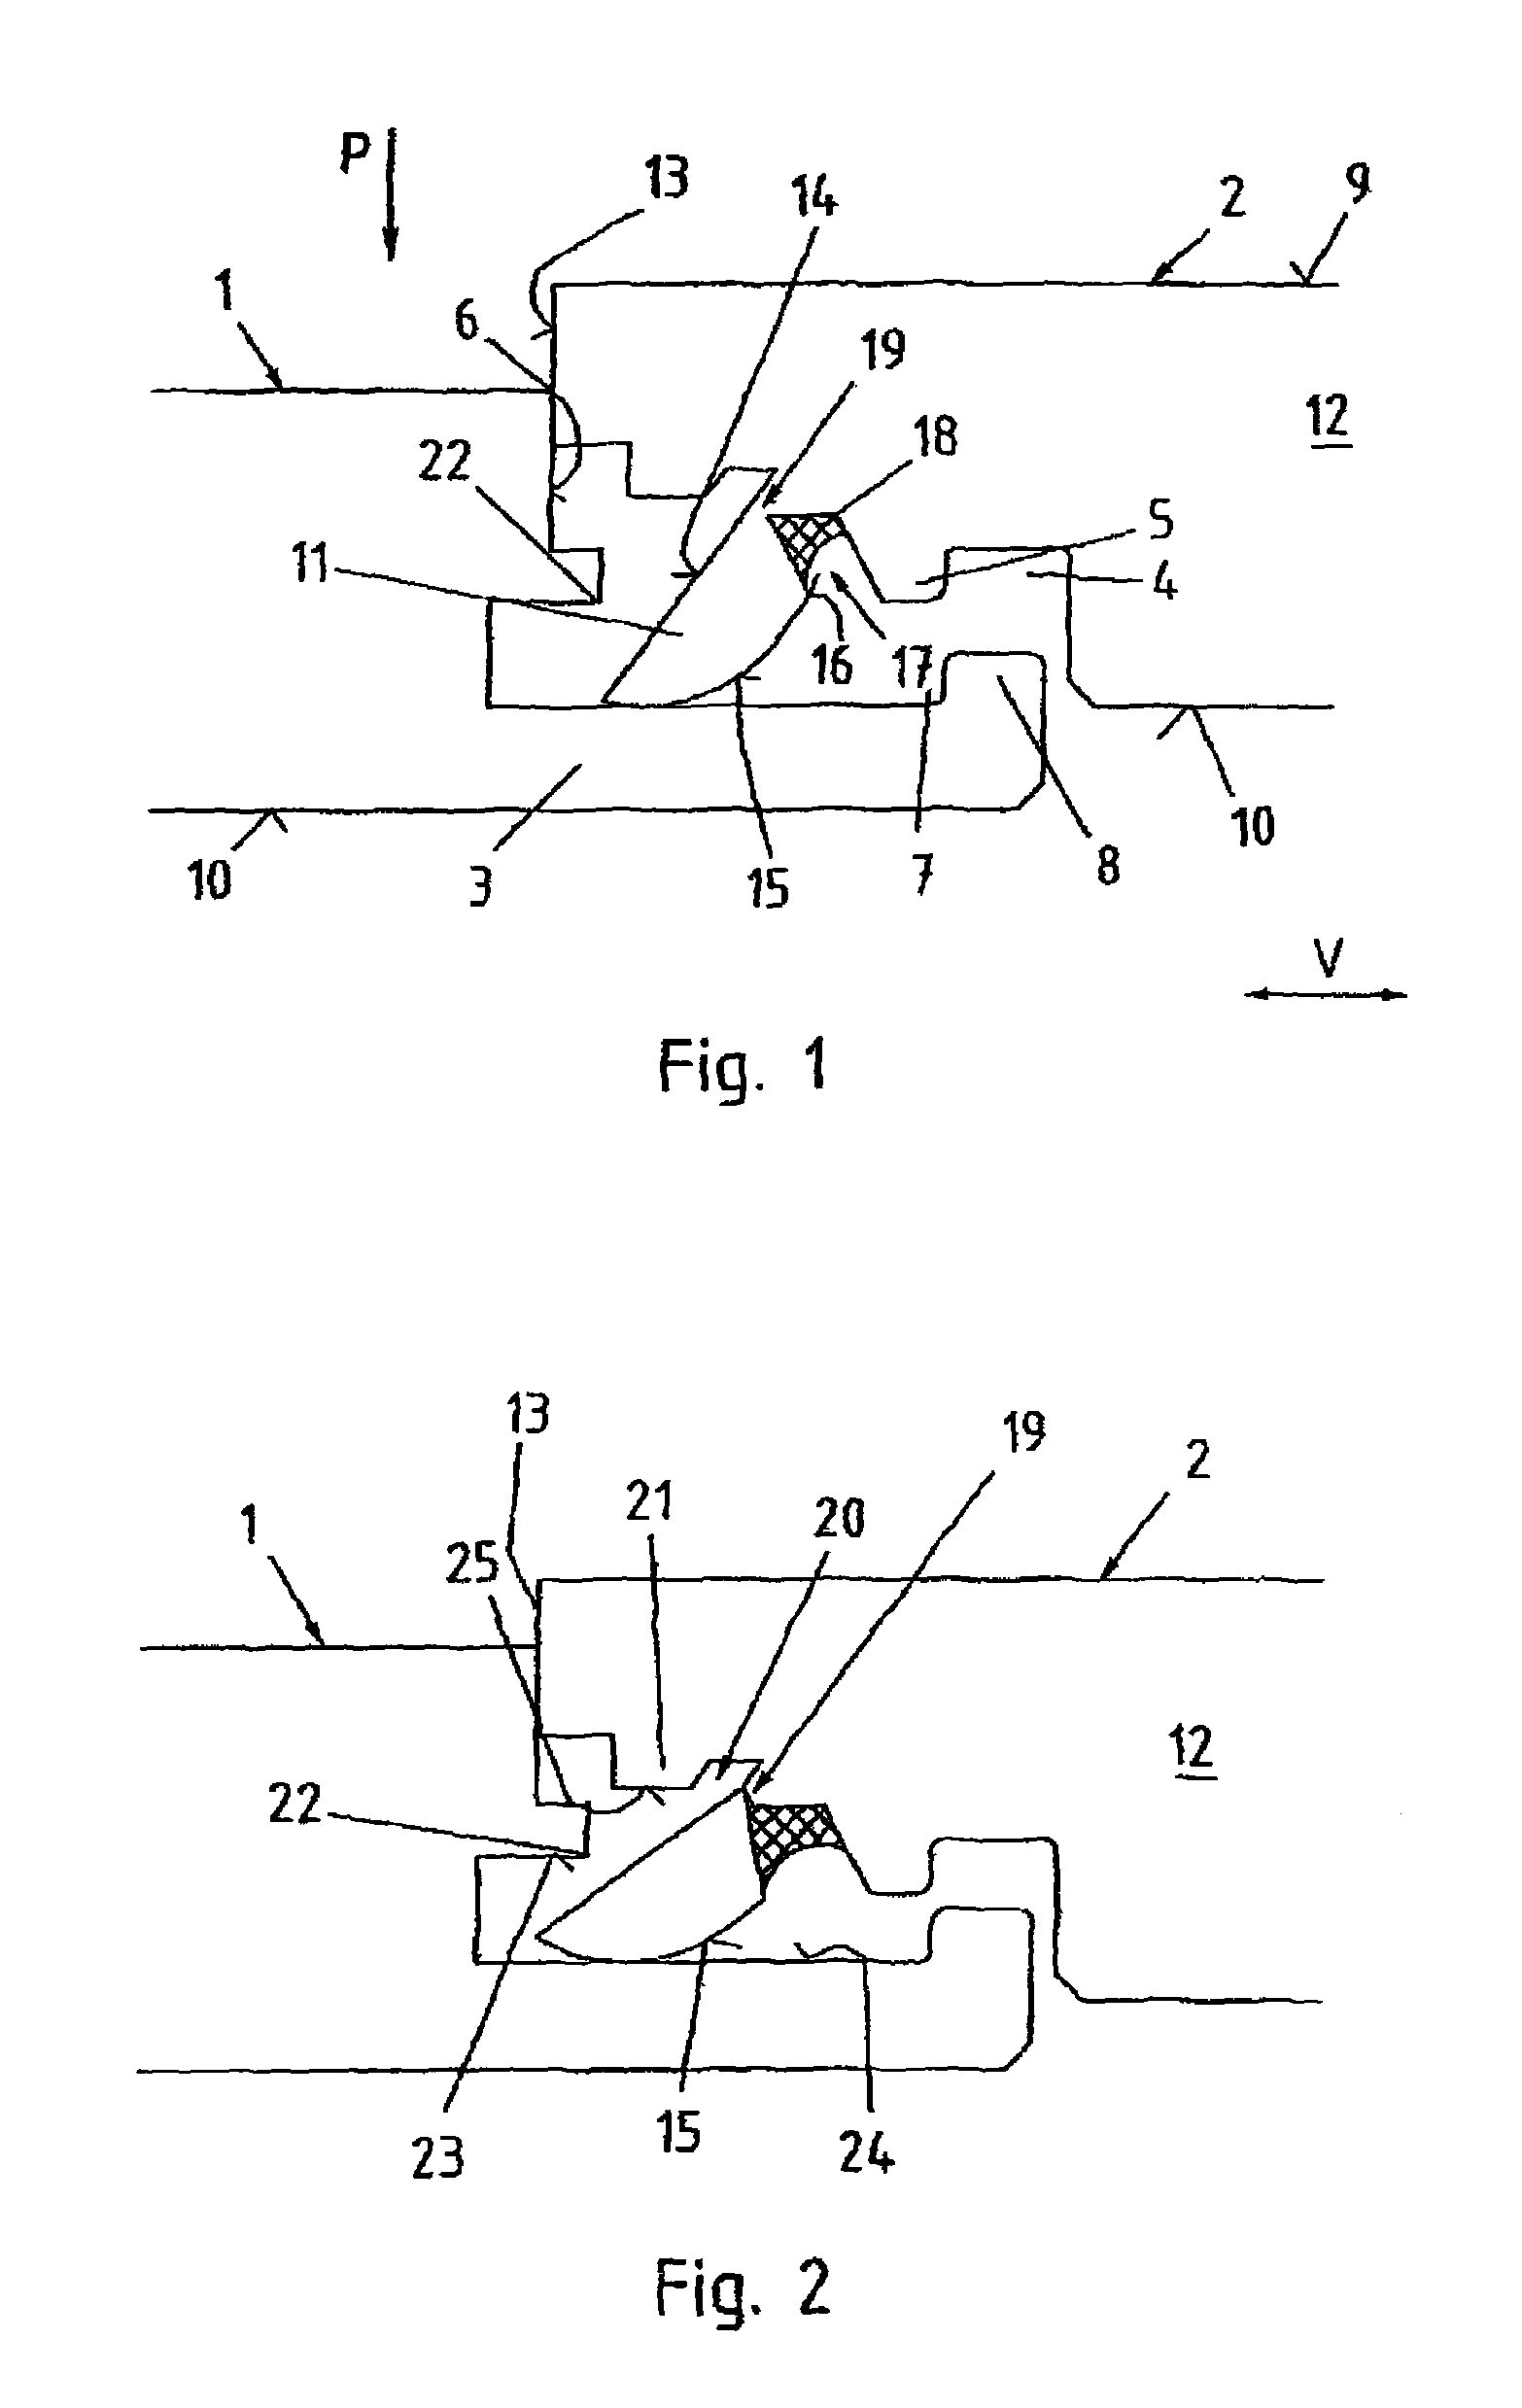 Covering from mechanically interconnectable elements